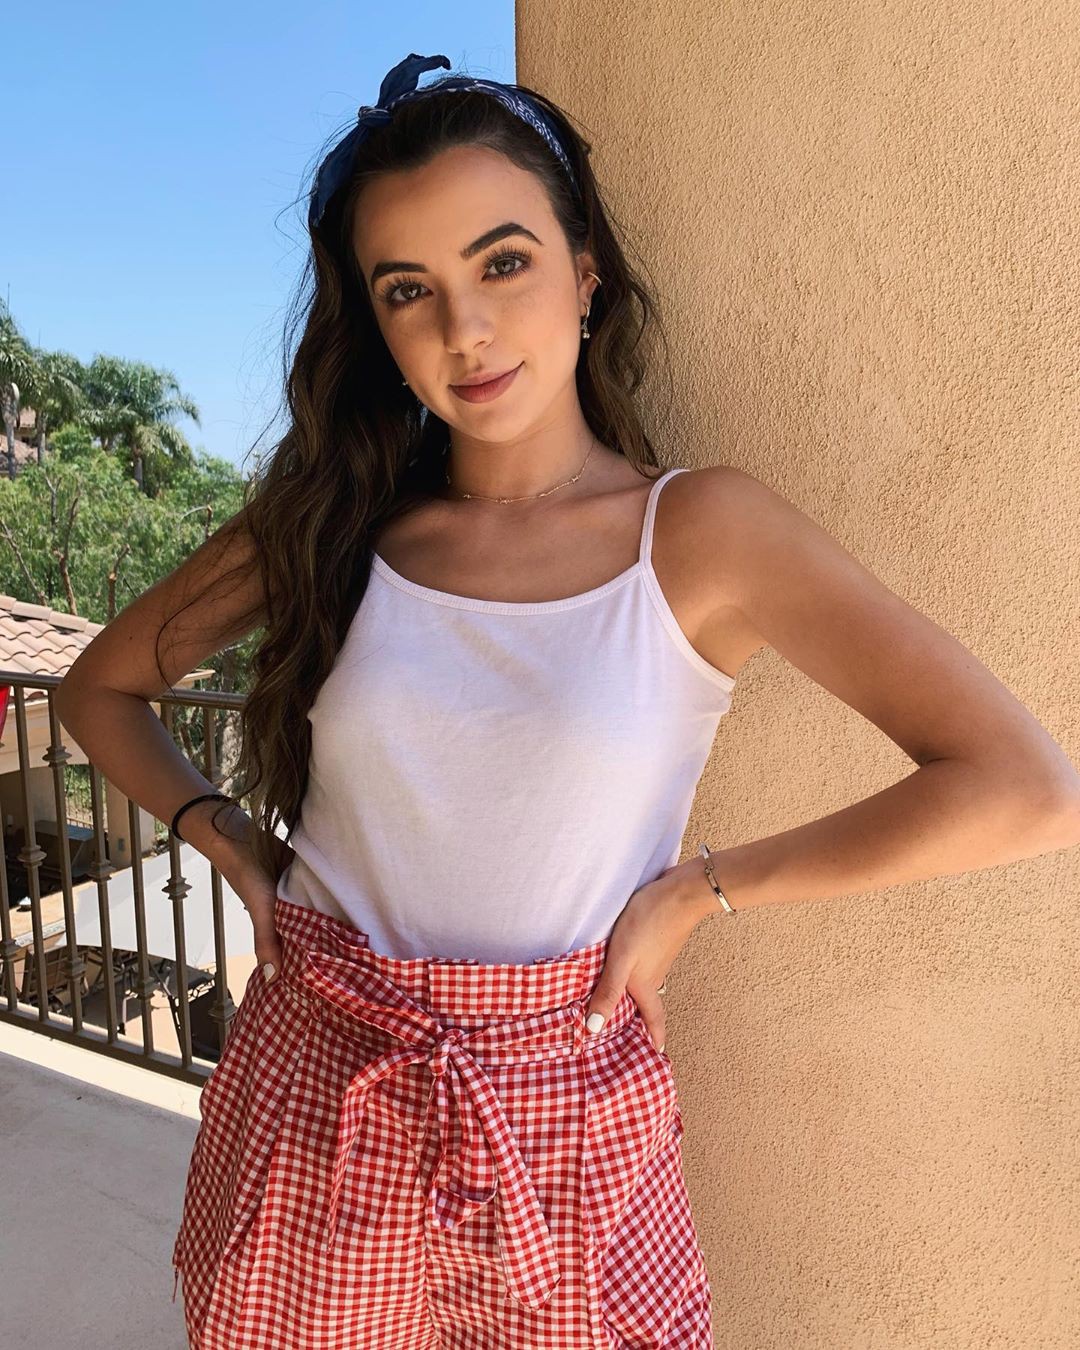 White and pink dress, instagram photoshoot, attire ideas: White And Pink Outfit,  TikTok Star Vanessa Merrell  